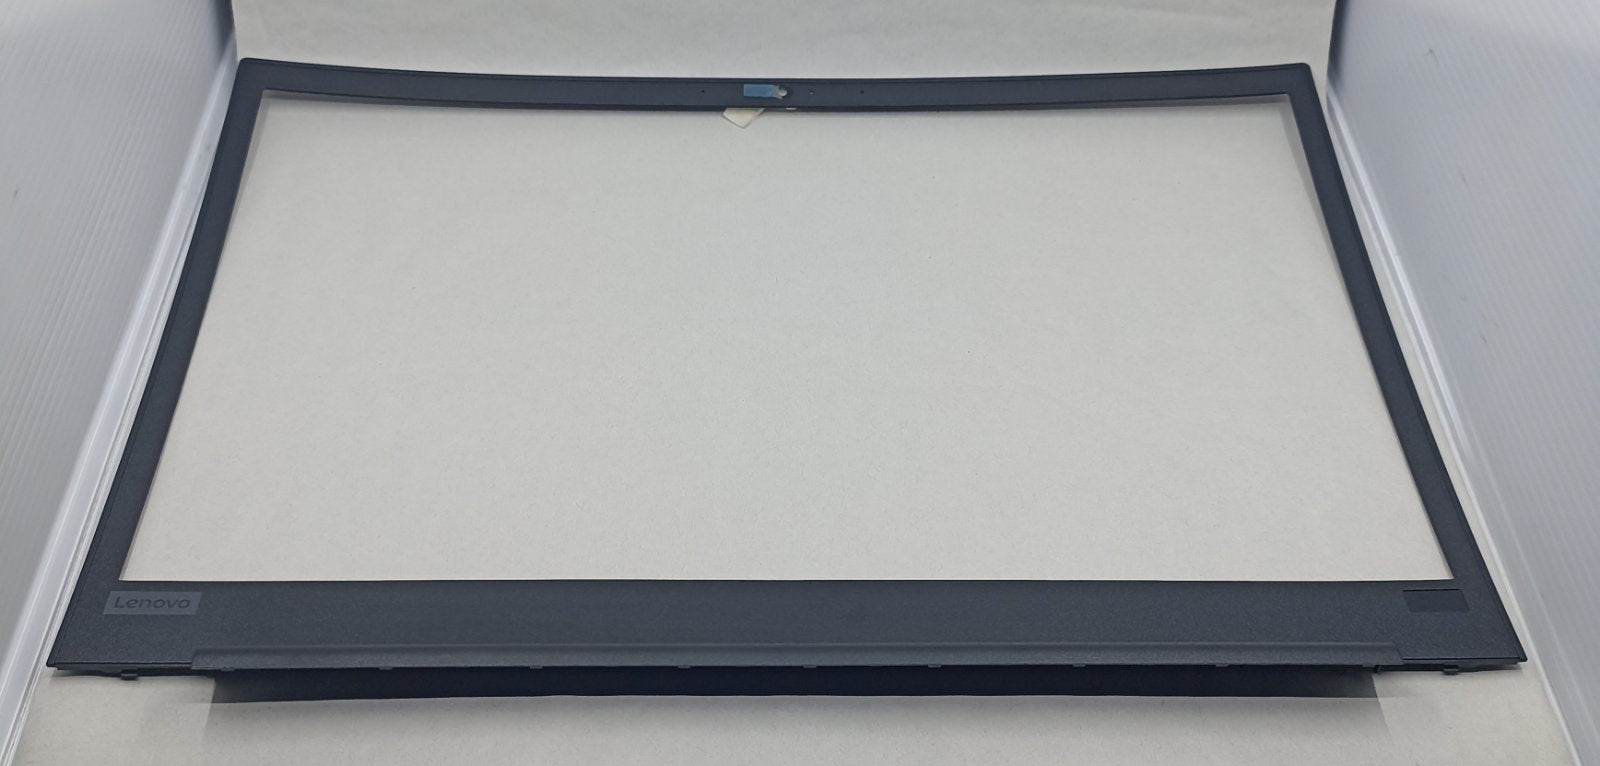 Replacement LCD Bezel for Lenovo E590 ThinkPad WL